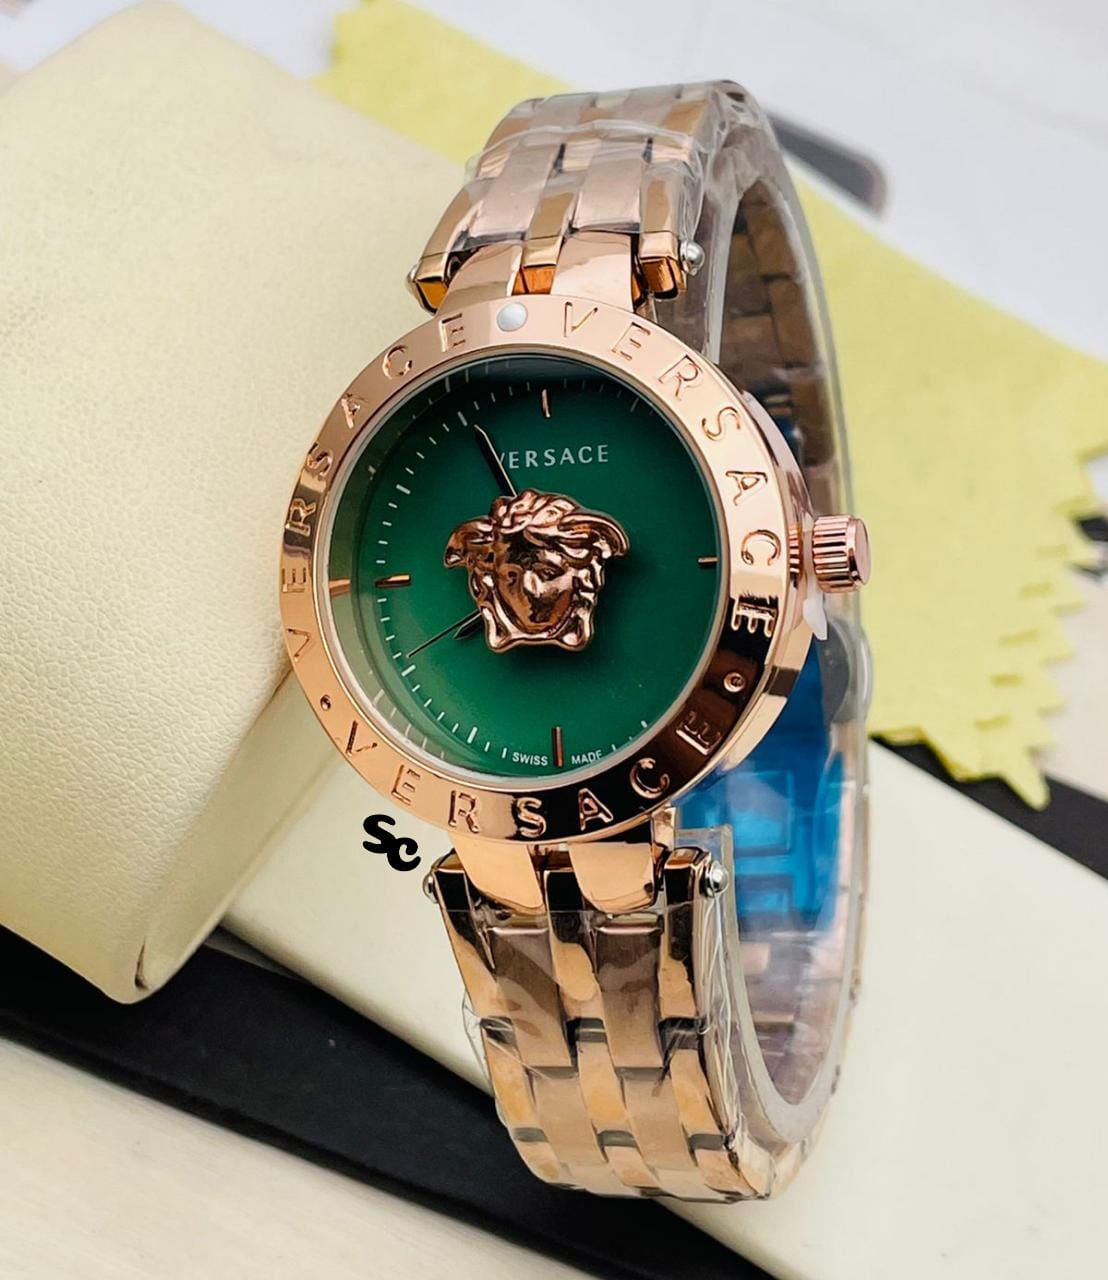 Extraordinary & Limited Edition Heritage collection by Versace, built up only to enhance your outfit. ✅ # Versace # For Her # Sleek and Decent # Dial Size 33mm # Beautiful Branded full Rose Gold CHOOSE YOUR DESIRED COLOUR NOW ❤️ - Working 12 hour analog - Rose Gold Stainless Steel bracelet - Designed bezel - Stainless Steel Back - Easy folding clasp lock - Water Resistant - quartz movement machinery ❣️ ✨ New model with price updated ✨